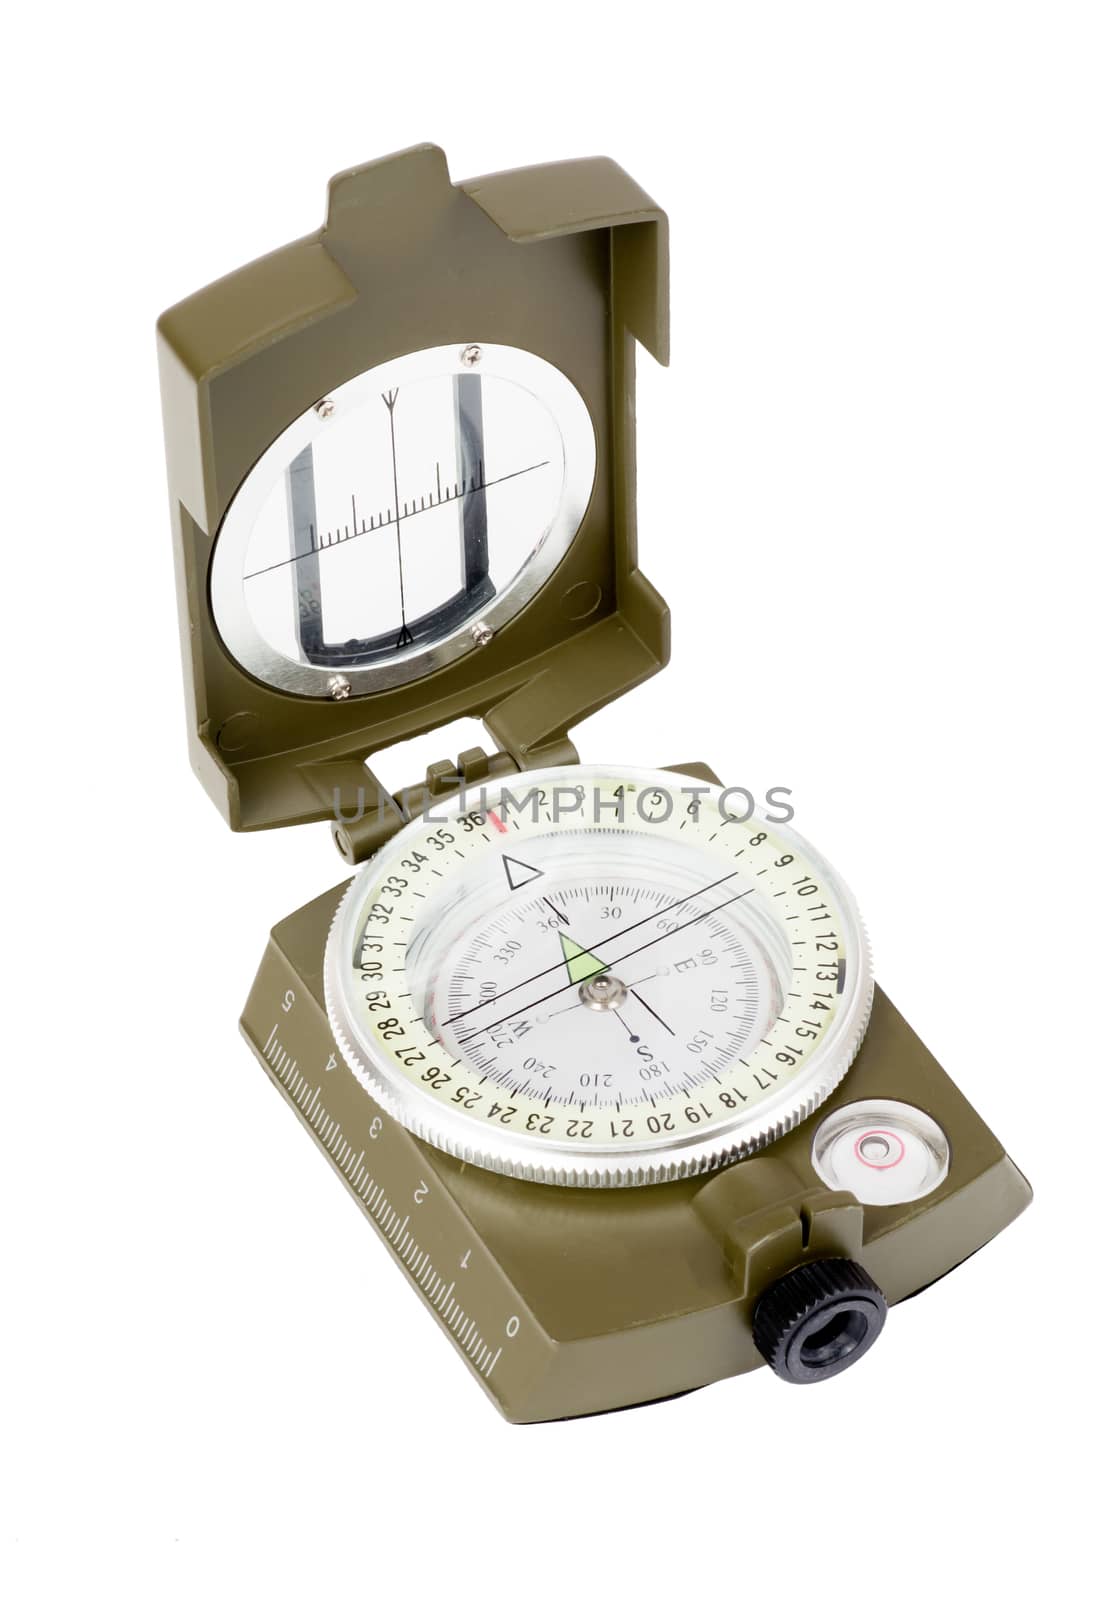 Vintage compass on isolated white background, closeup